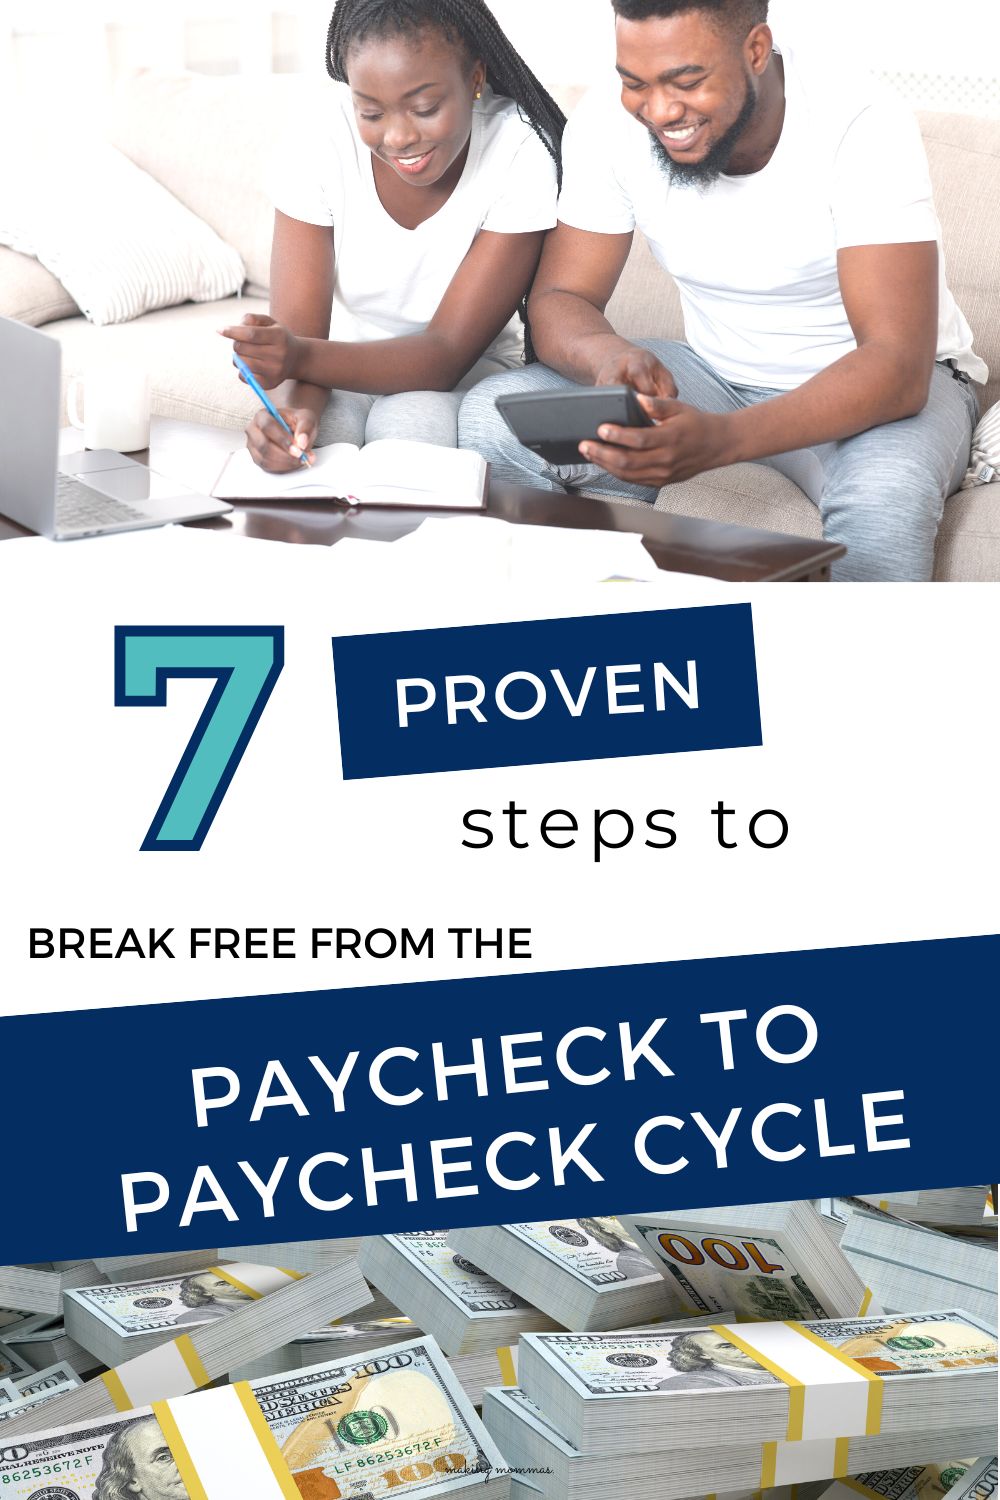 pin image of seven proven steps to break free from the paycheck to paycheck cycle